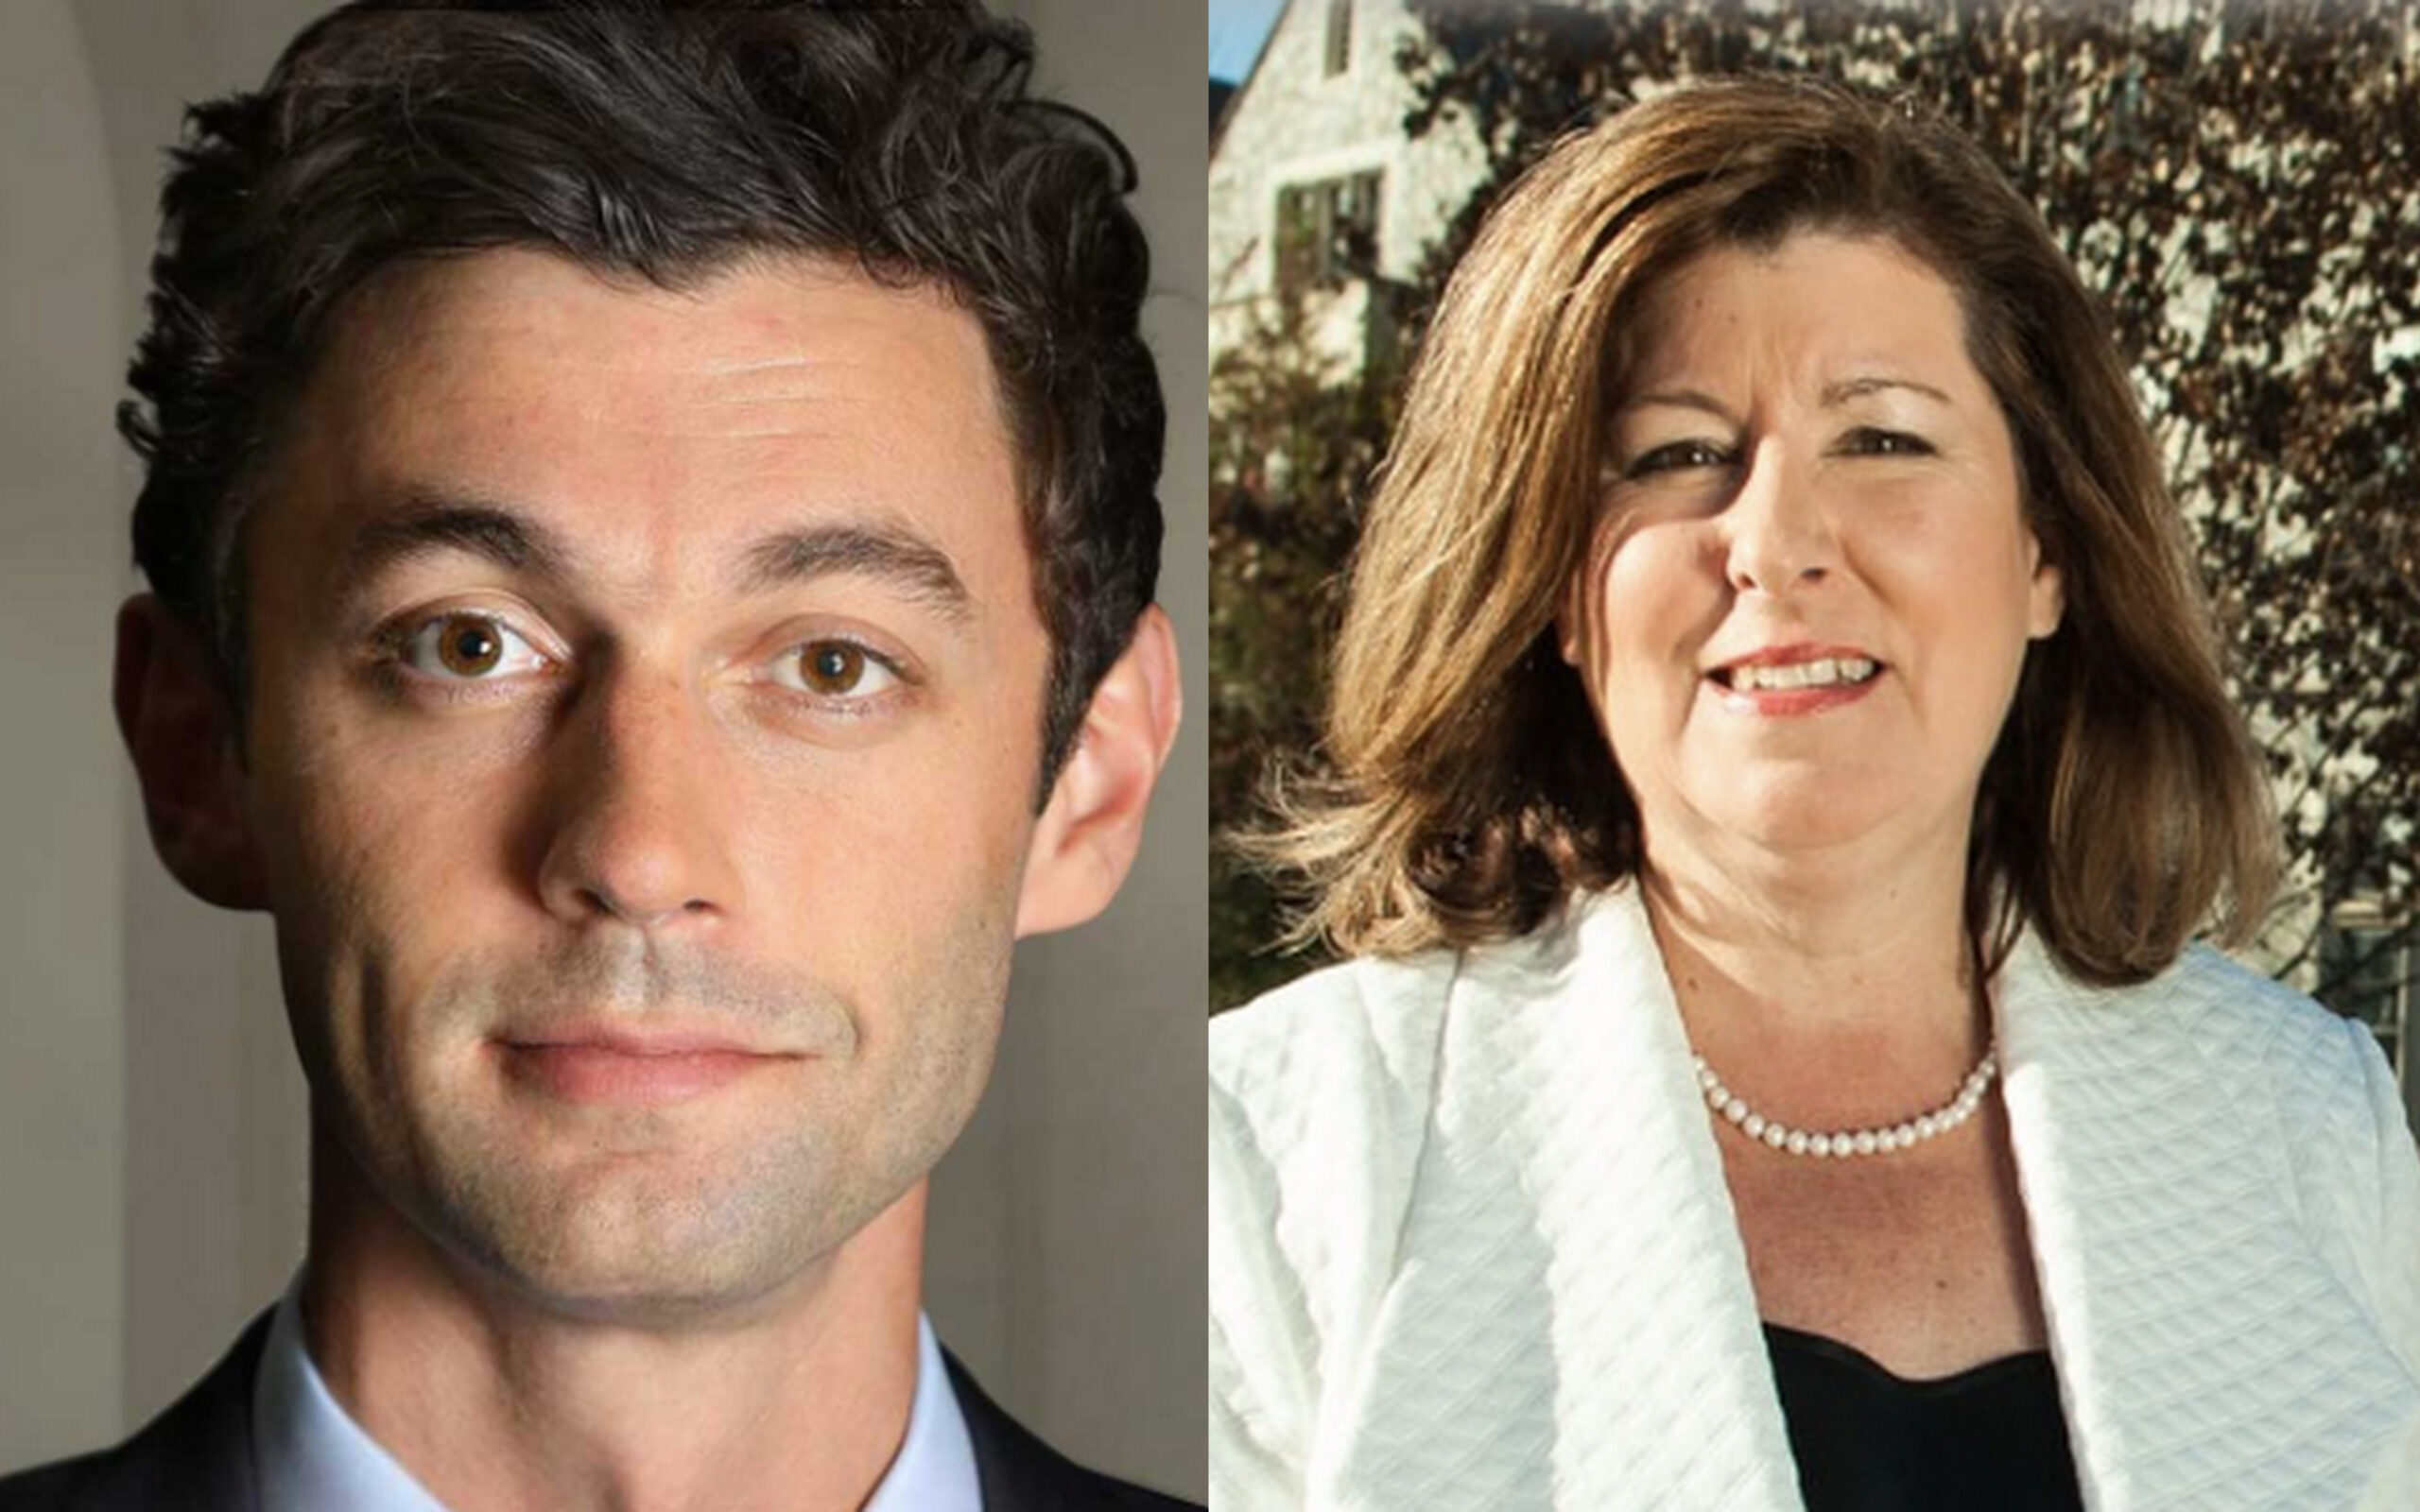 Handel beats opponent’s Ossoff in 6th Congressional District runoff